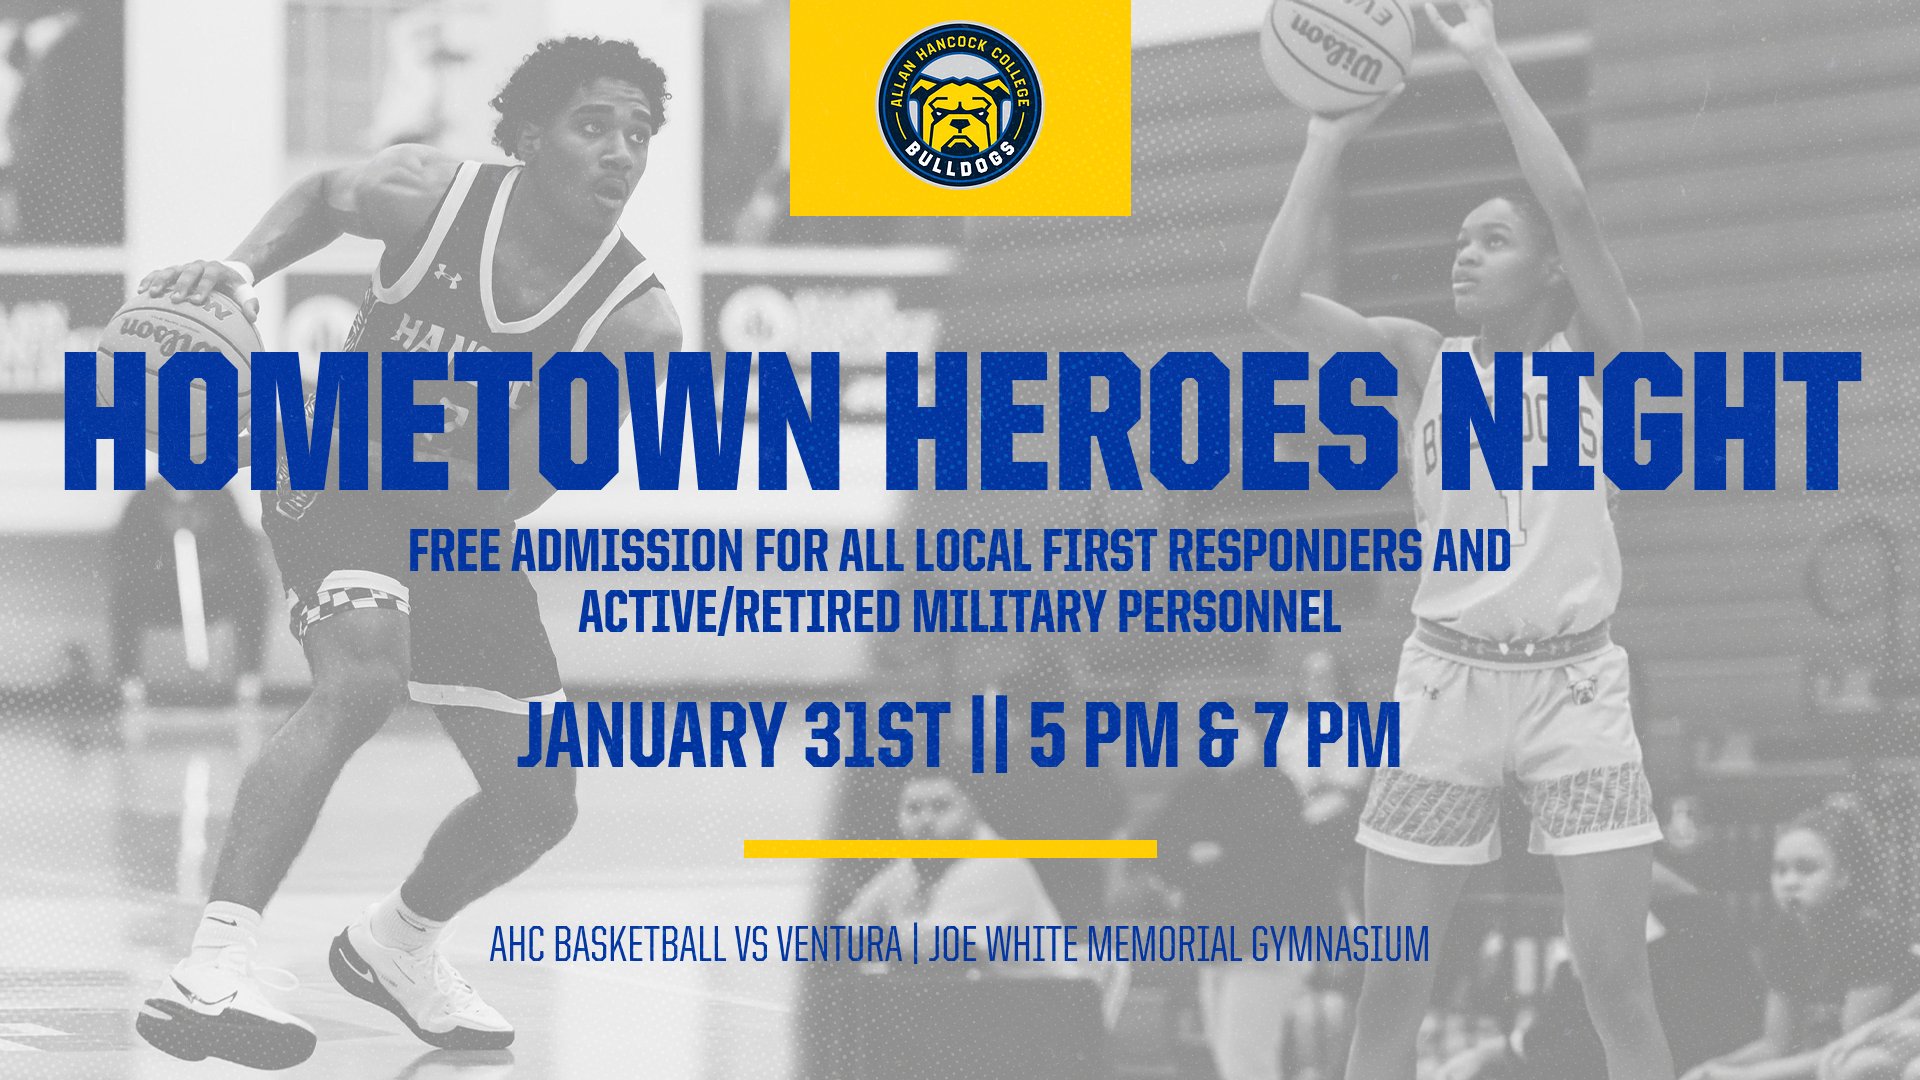 AHC Basketball to Host Hometown Heroes Night on 1/31